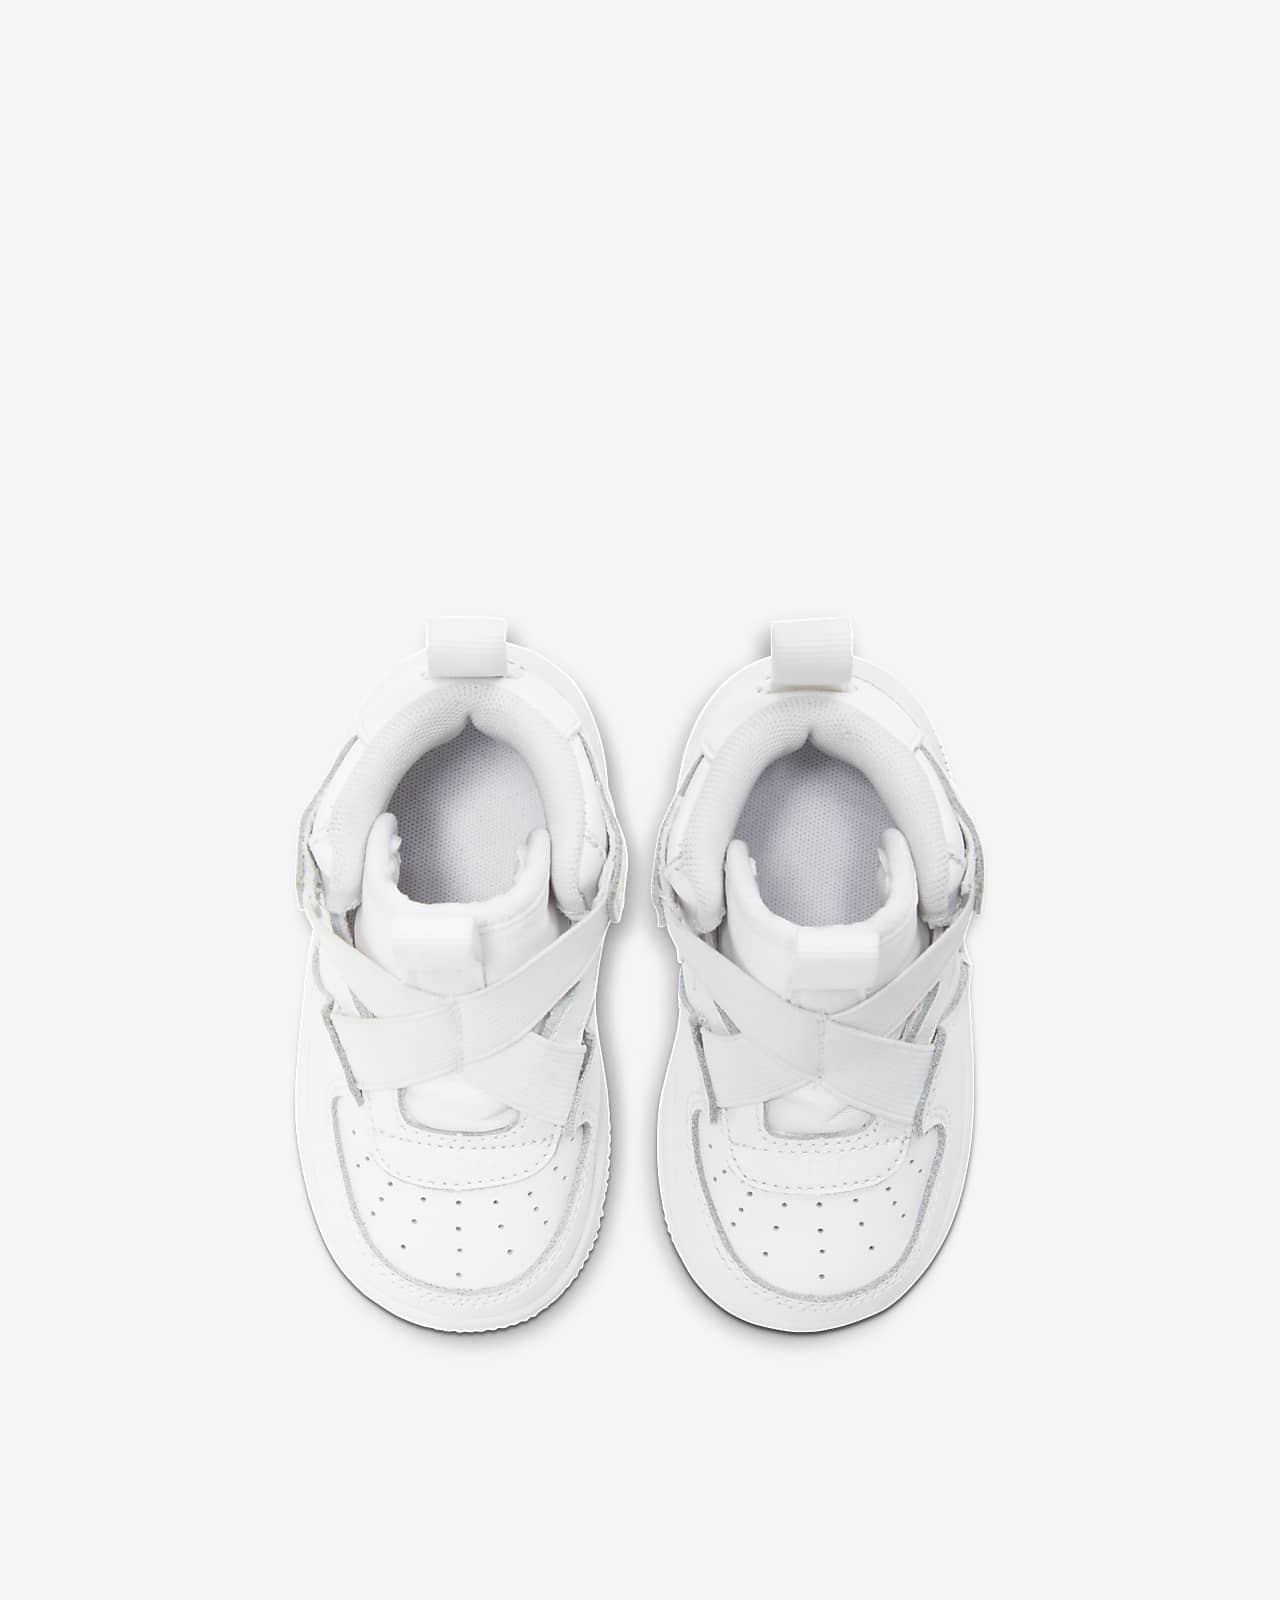 nike air force 1 highness baby